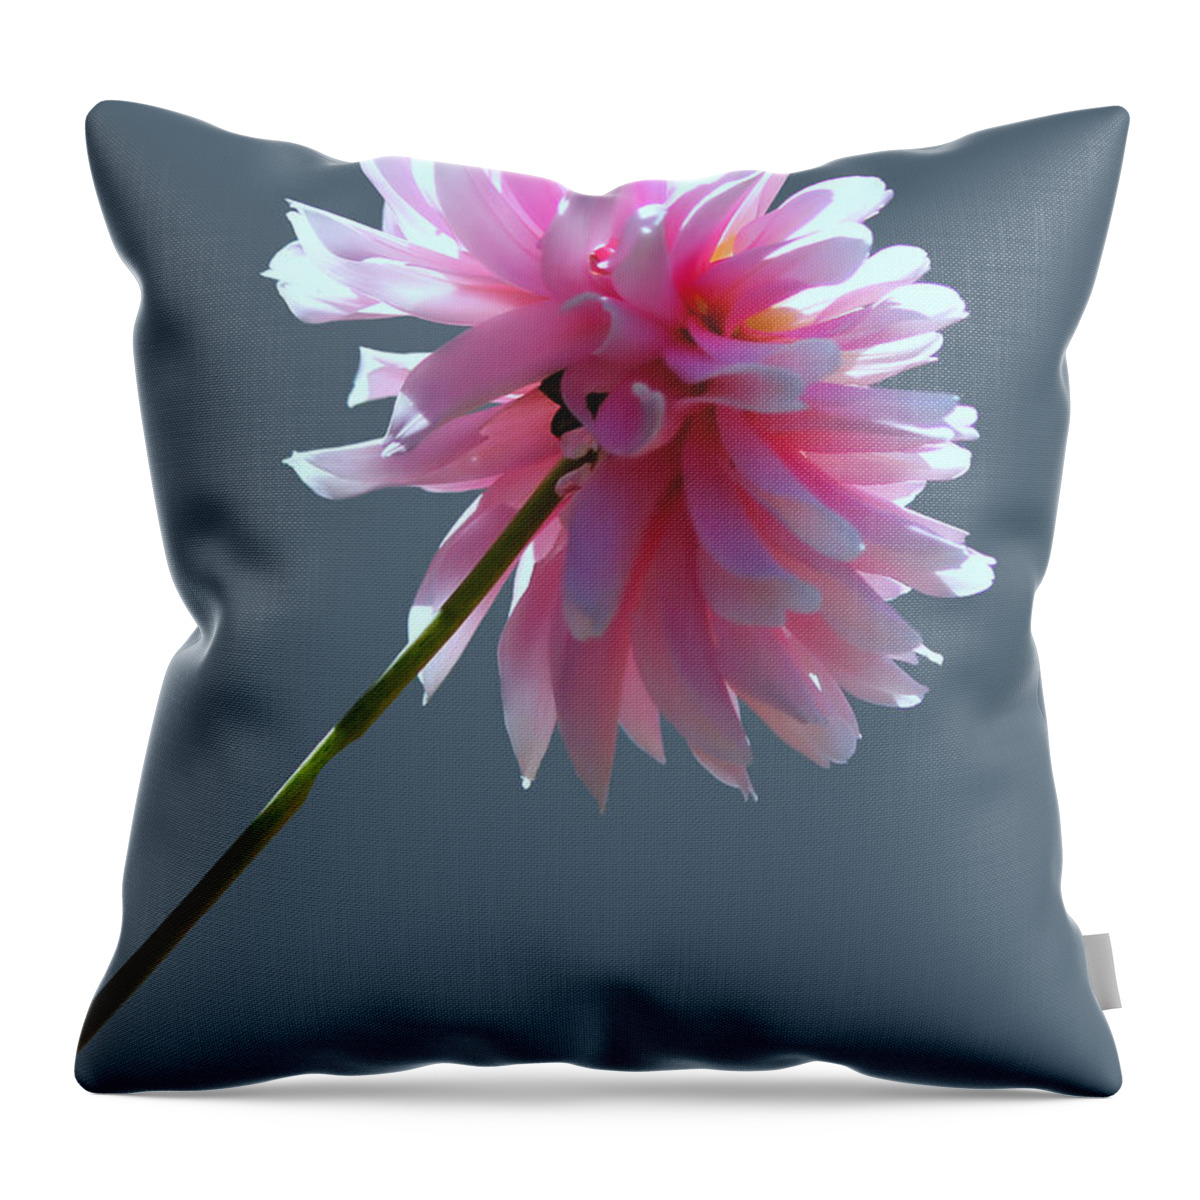 Dahlia Throw Pillow featuring the photograph Adored by Jeanette C Landstrom